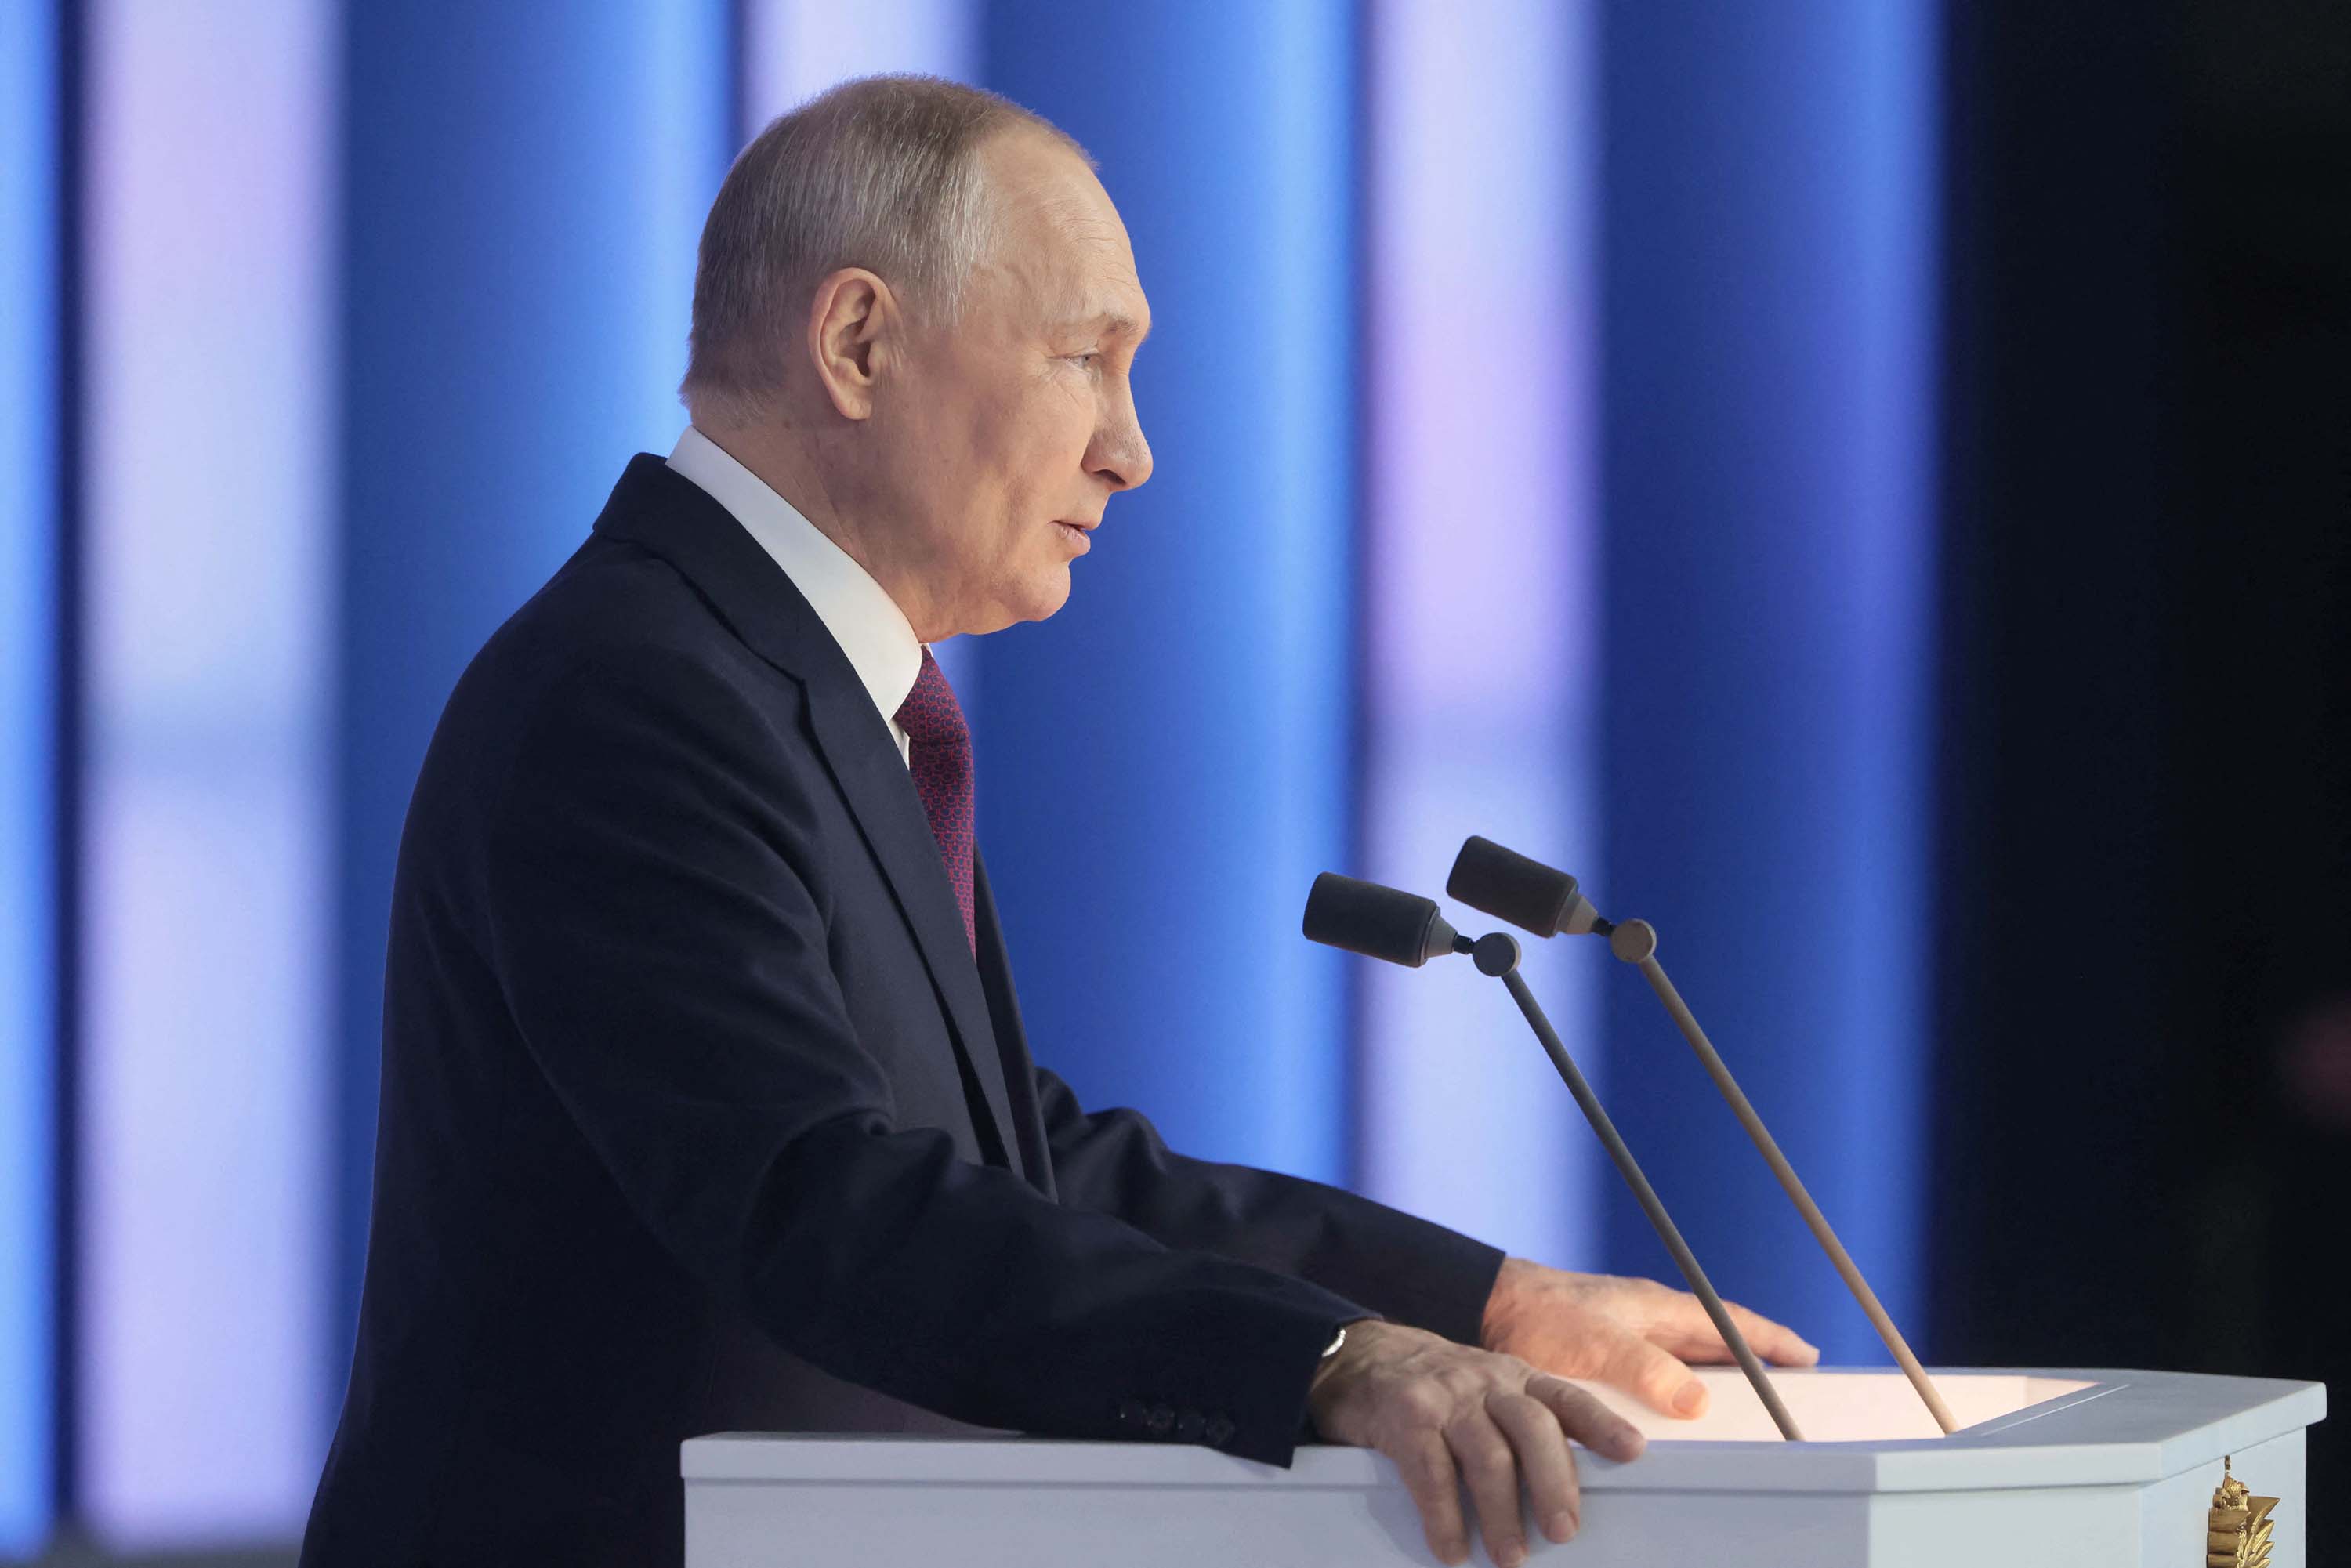 Russia is suspending its participation in New START nuclear weapons treaty, Putin says